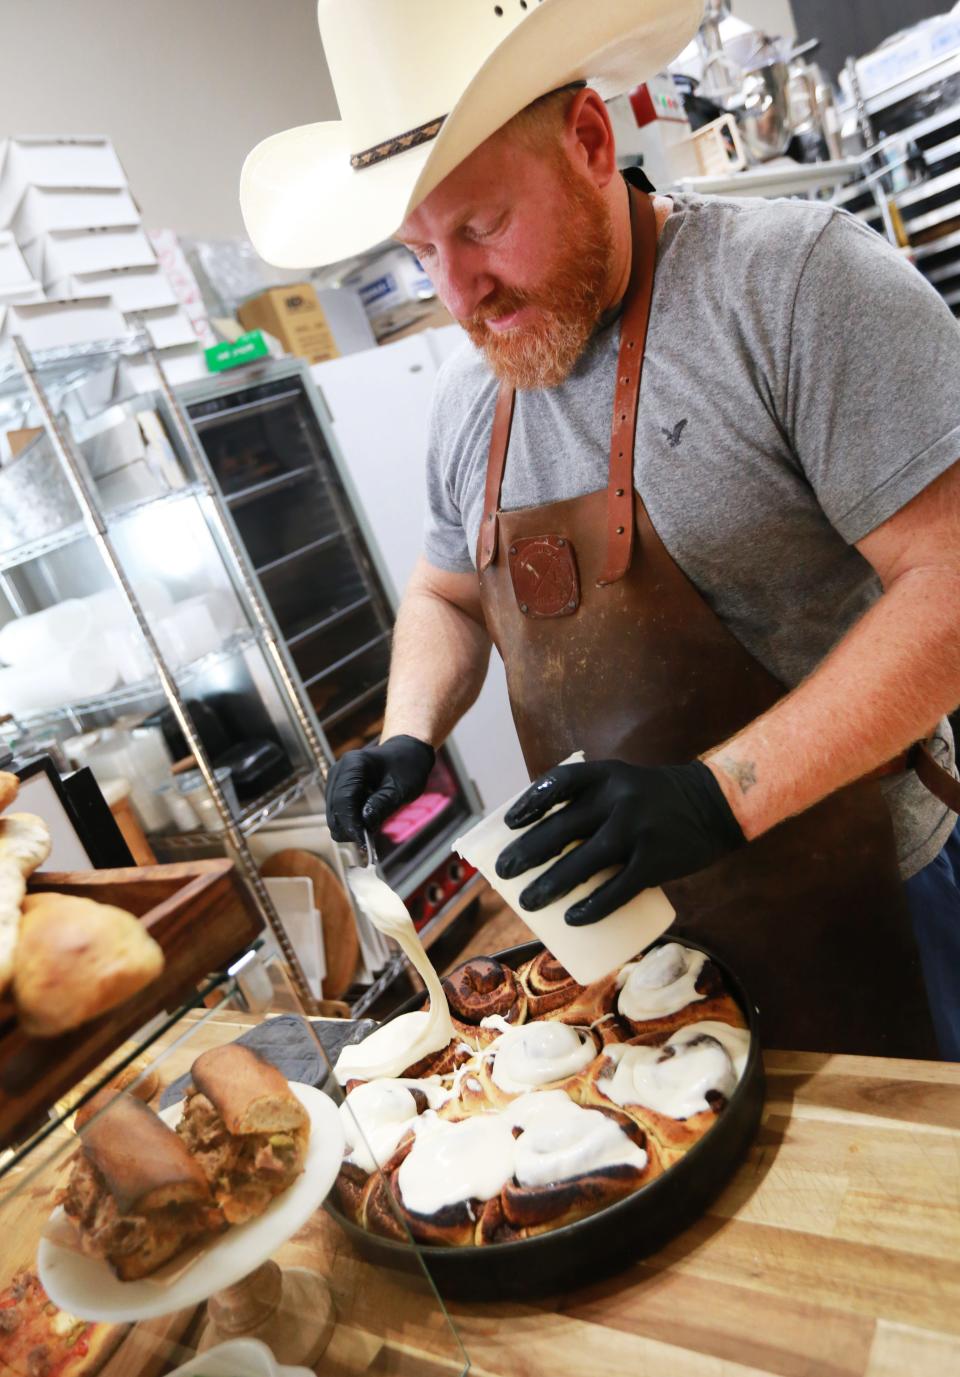 Paul Booras glazes a pan of cinnamon rolls at Rehoboth Baking Co on Sunday, Sept. 4, 2022.